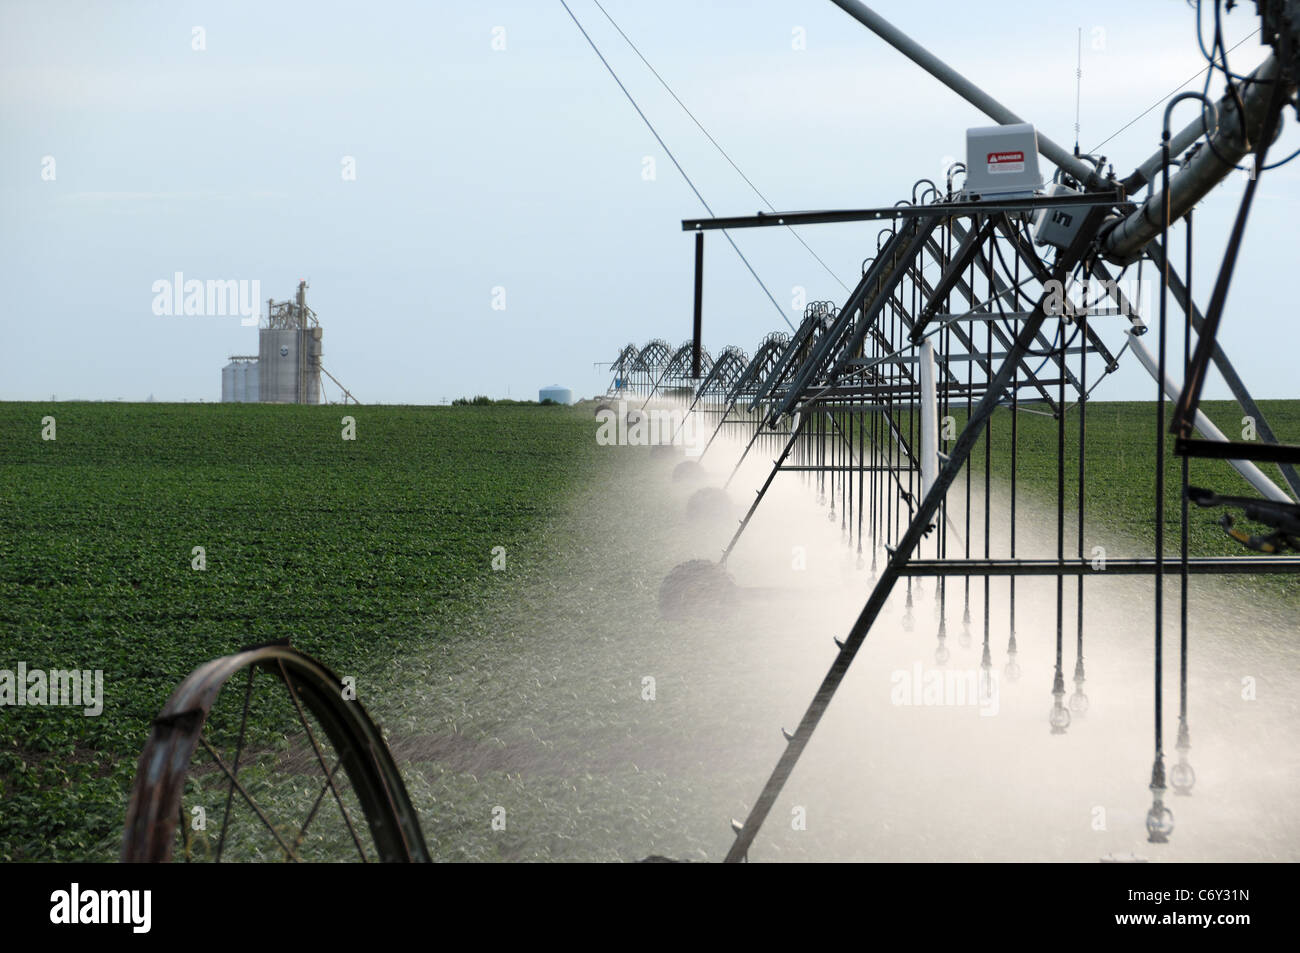 Commercial farm irrigation sprayer spraying crop with water. Grain elevator in background. Stock Photo